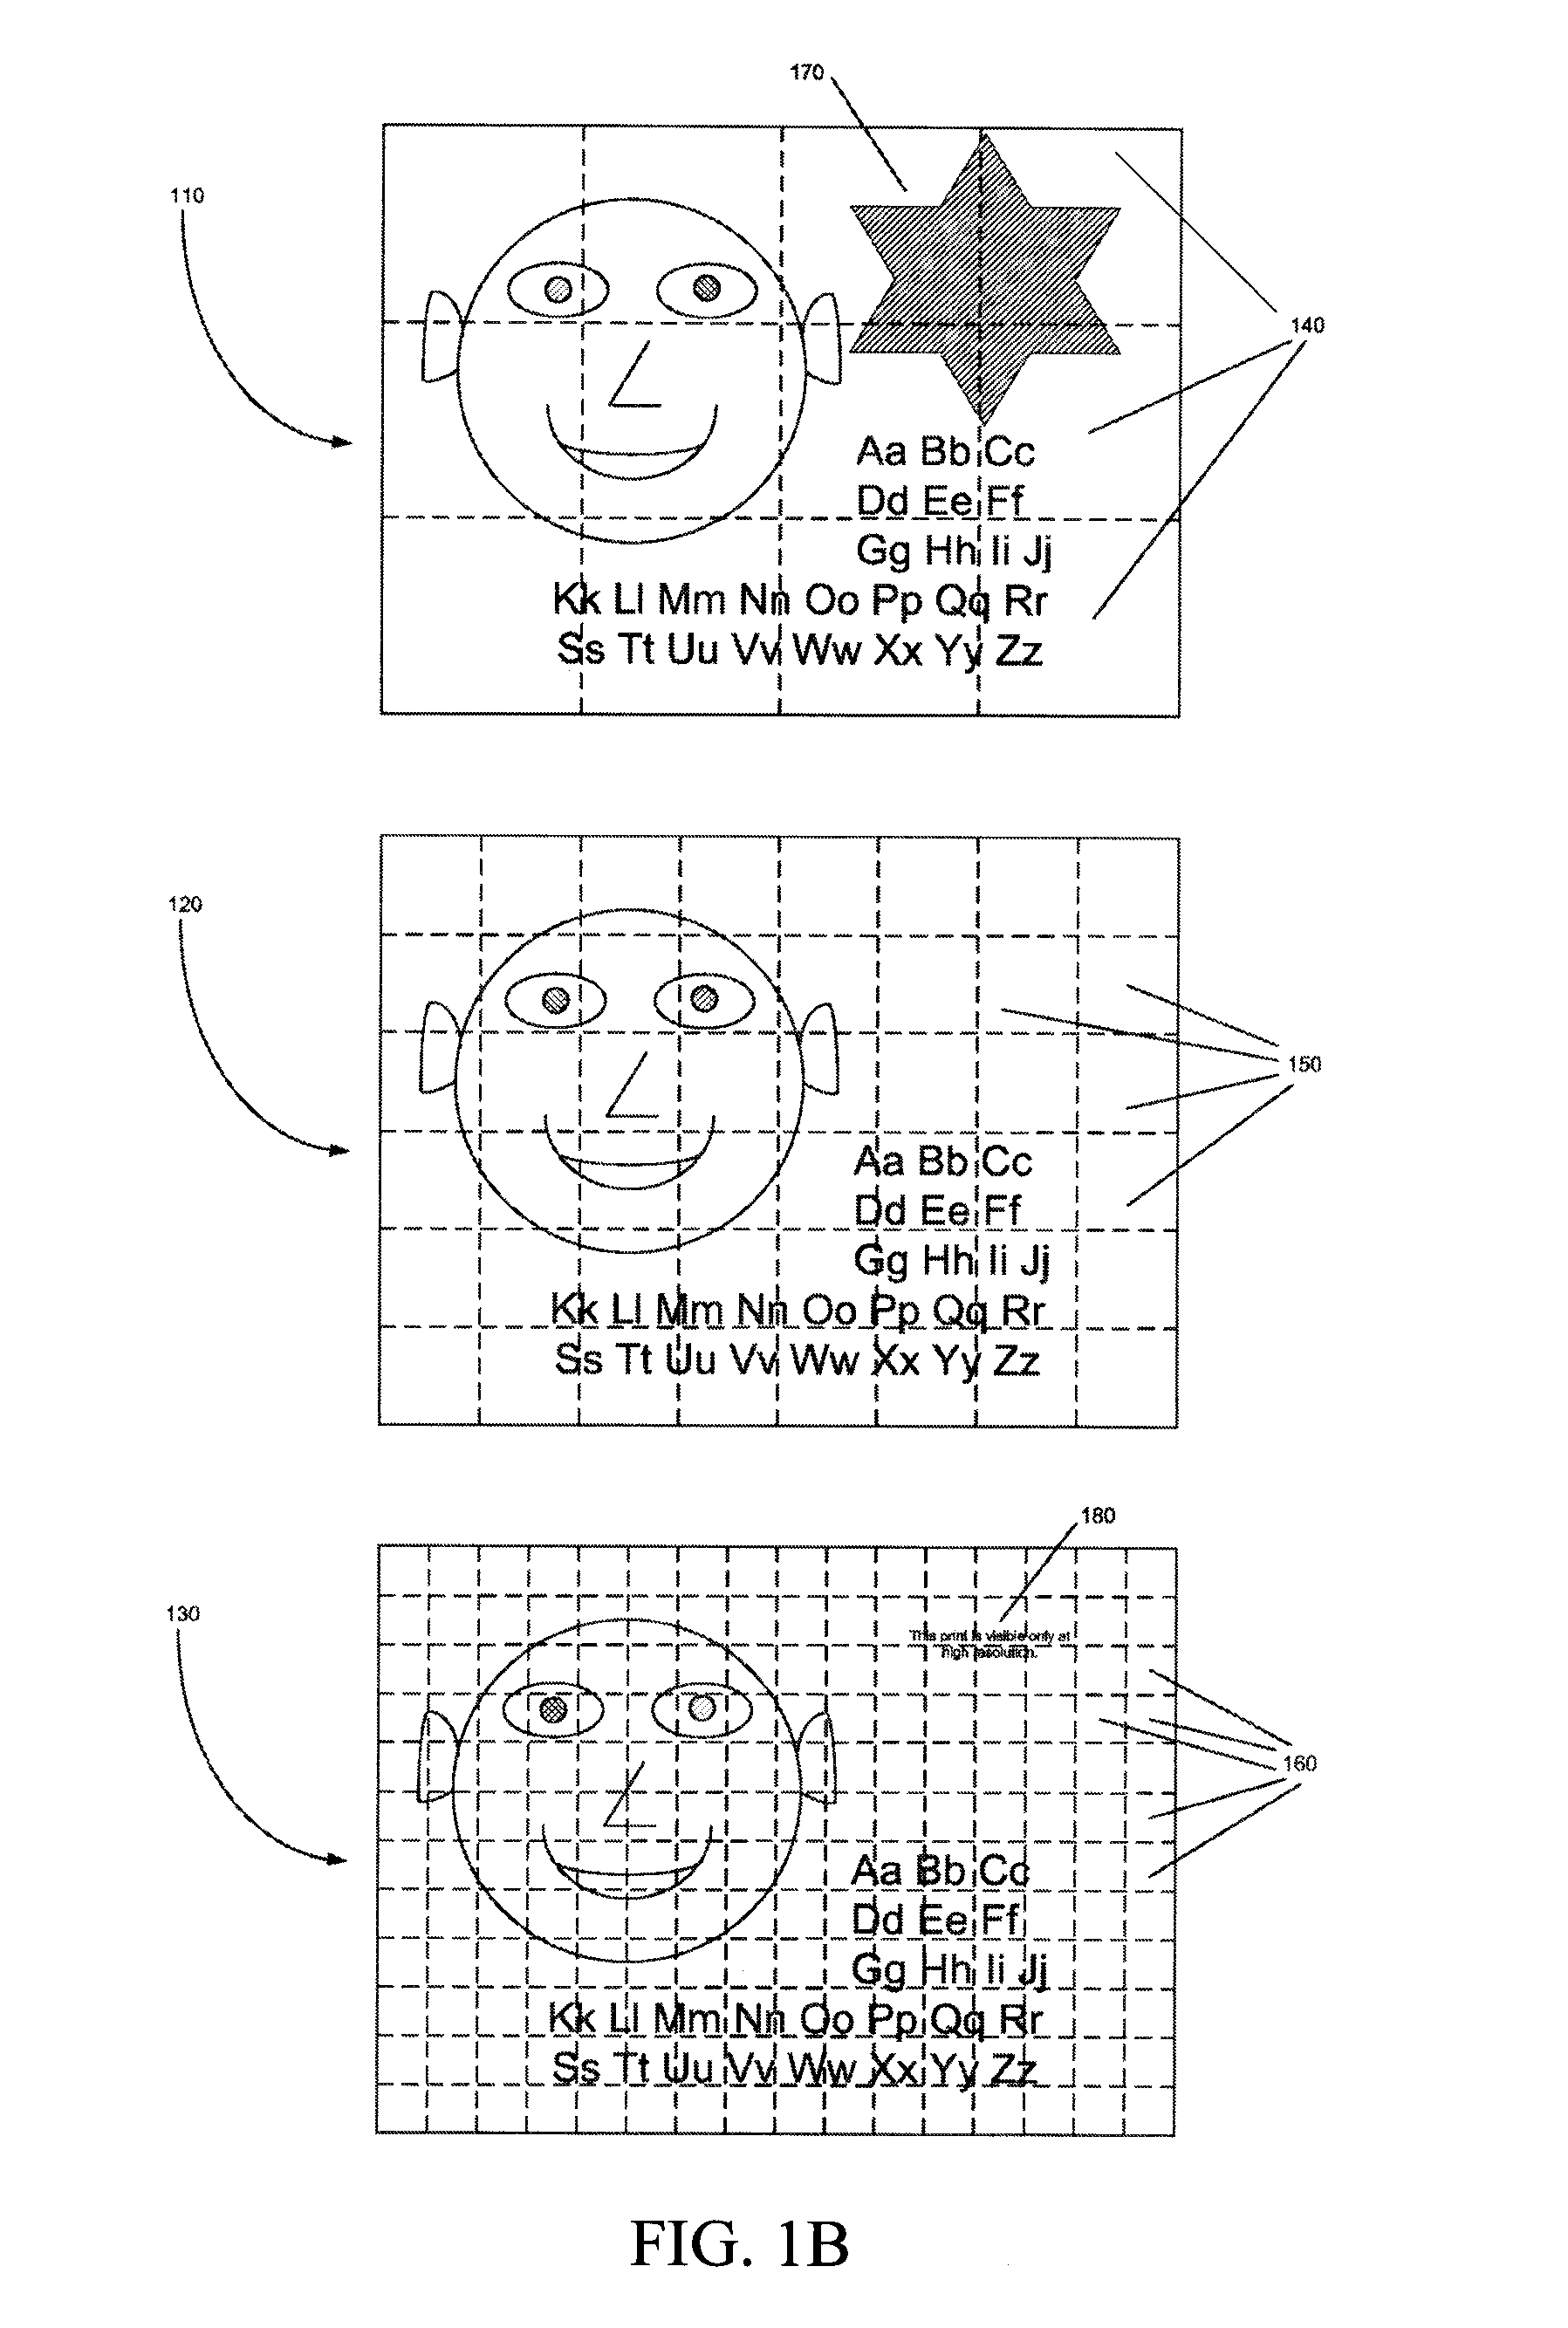 Method and system for streaming documents, e-mail attachments and maps to wireless devices